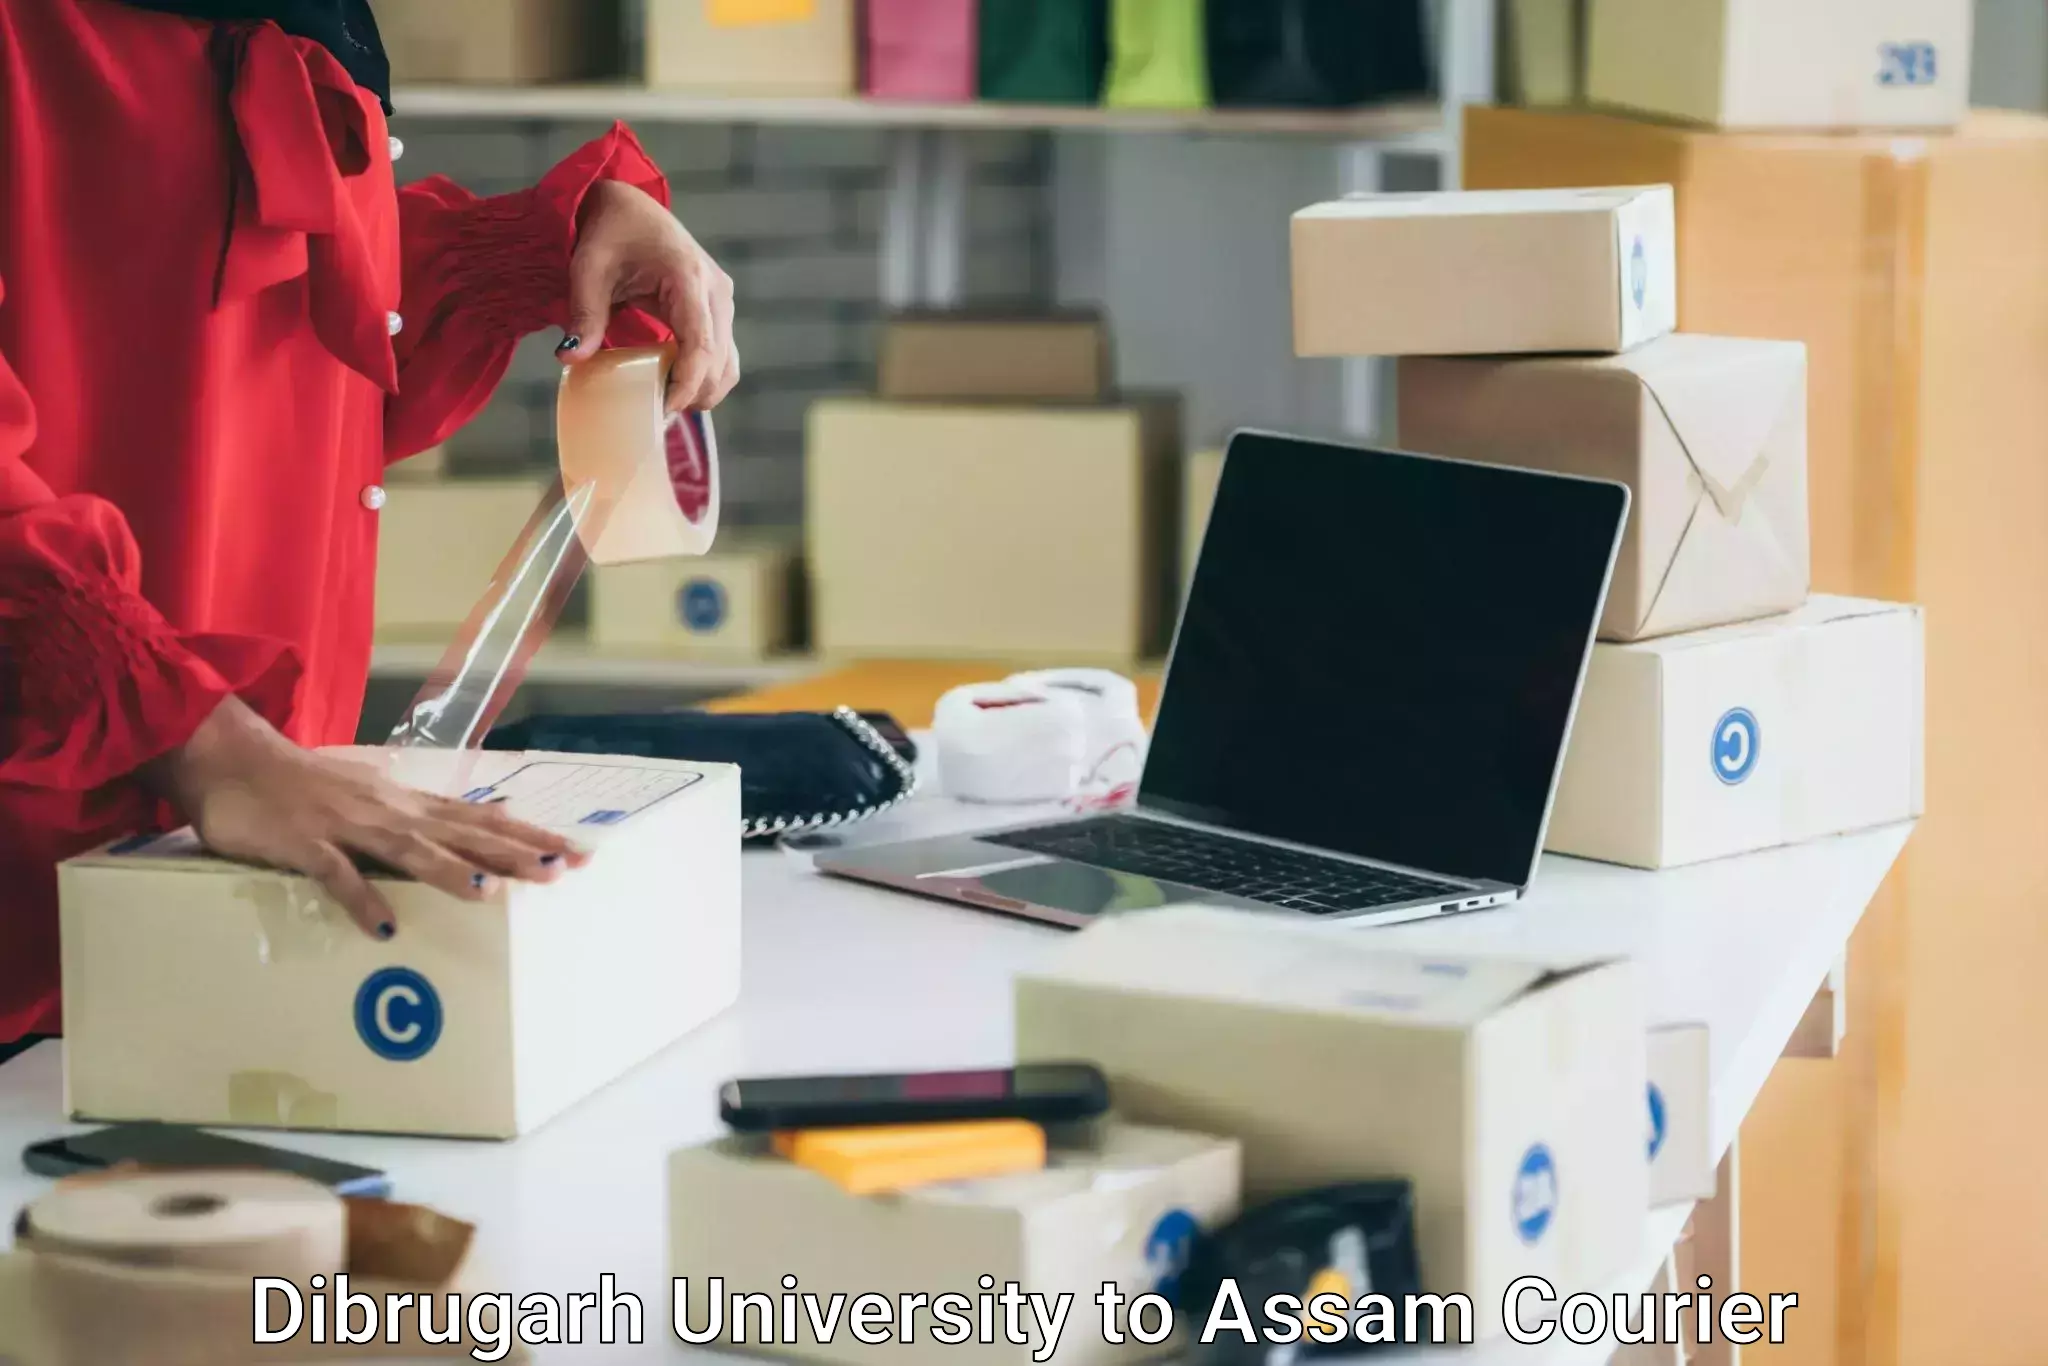 Moving and storage services in Dibrugarh University to Gohpur